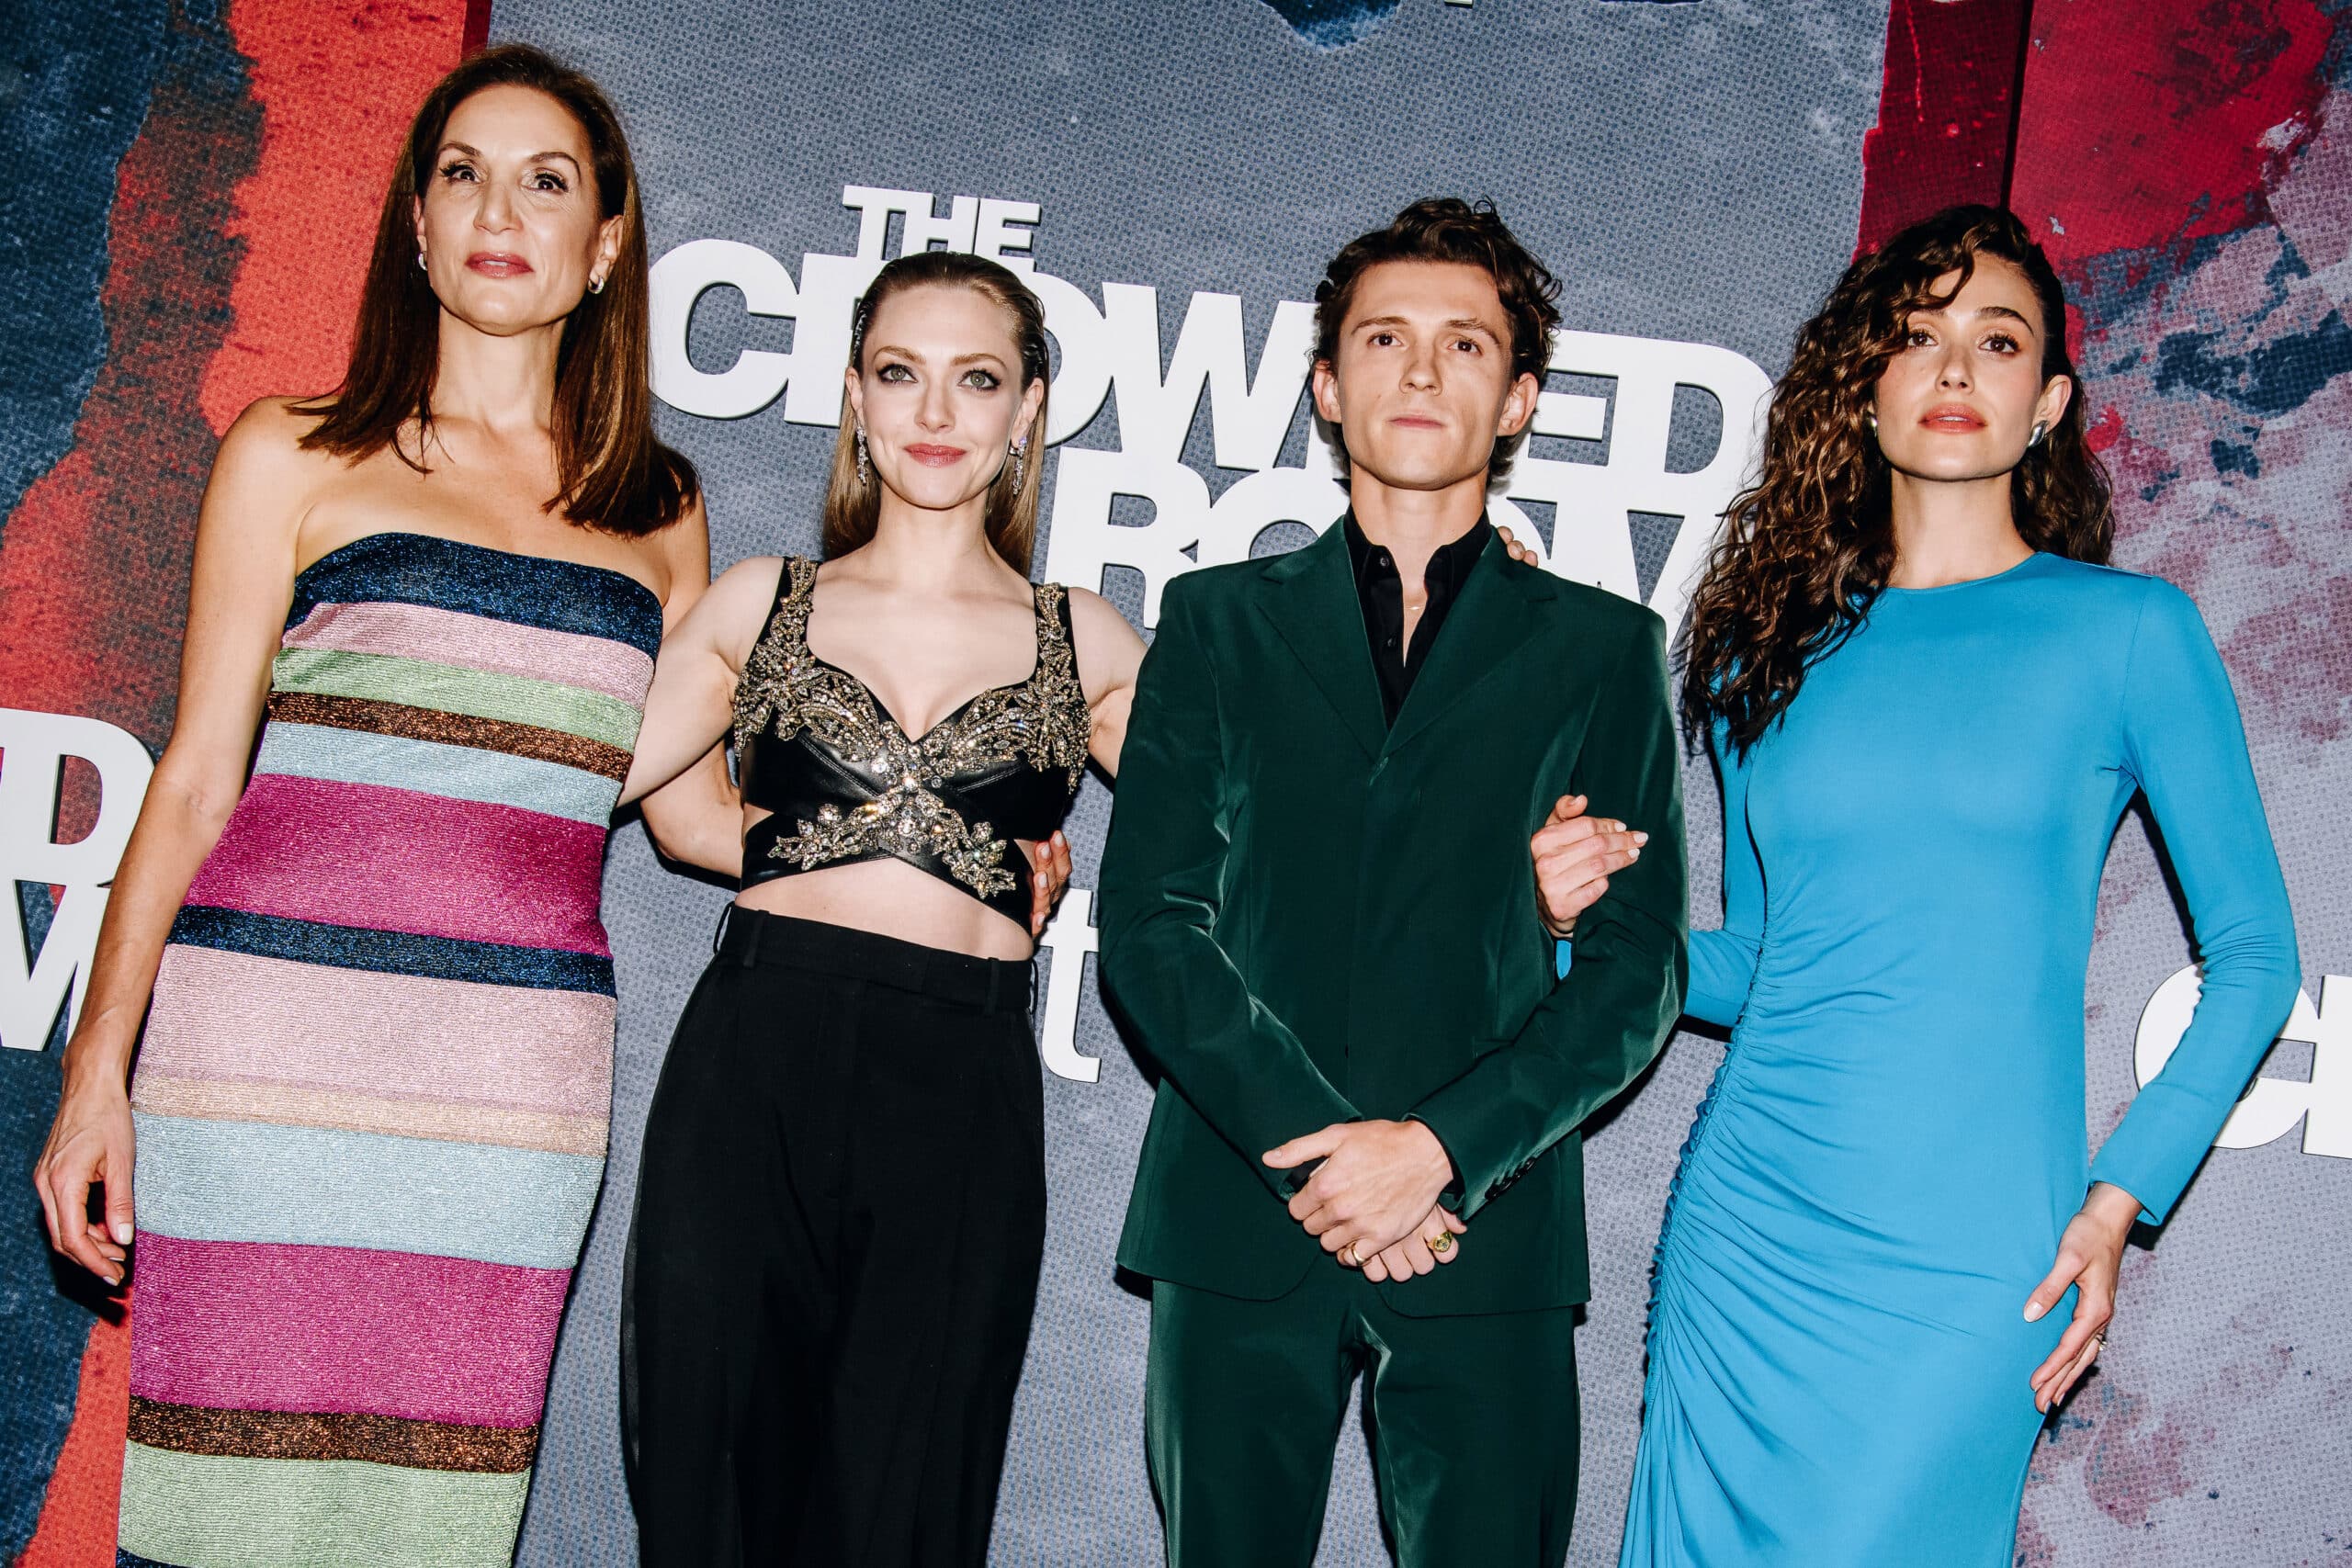 Alexandra Milchan, Amanda Seyfried, Tom Holland and Emmy Rossum at the premiere of "The Crowded Room" held at the Museum of Modern Art on June 1, 2023 in New York City.